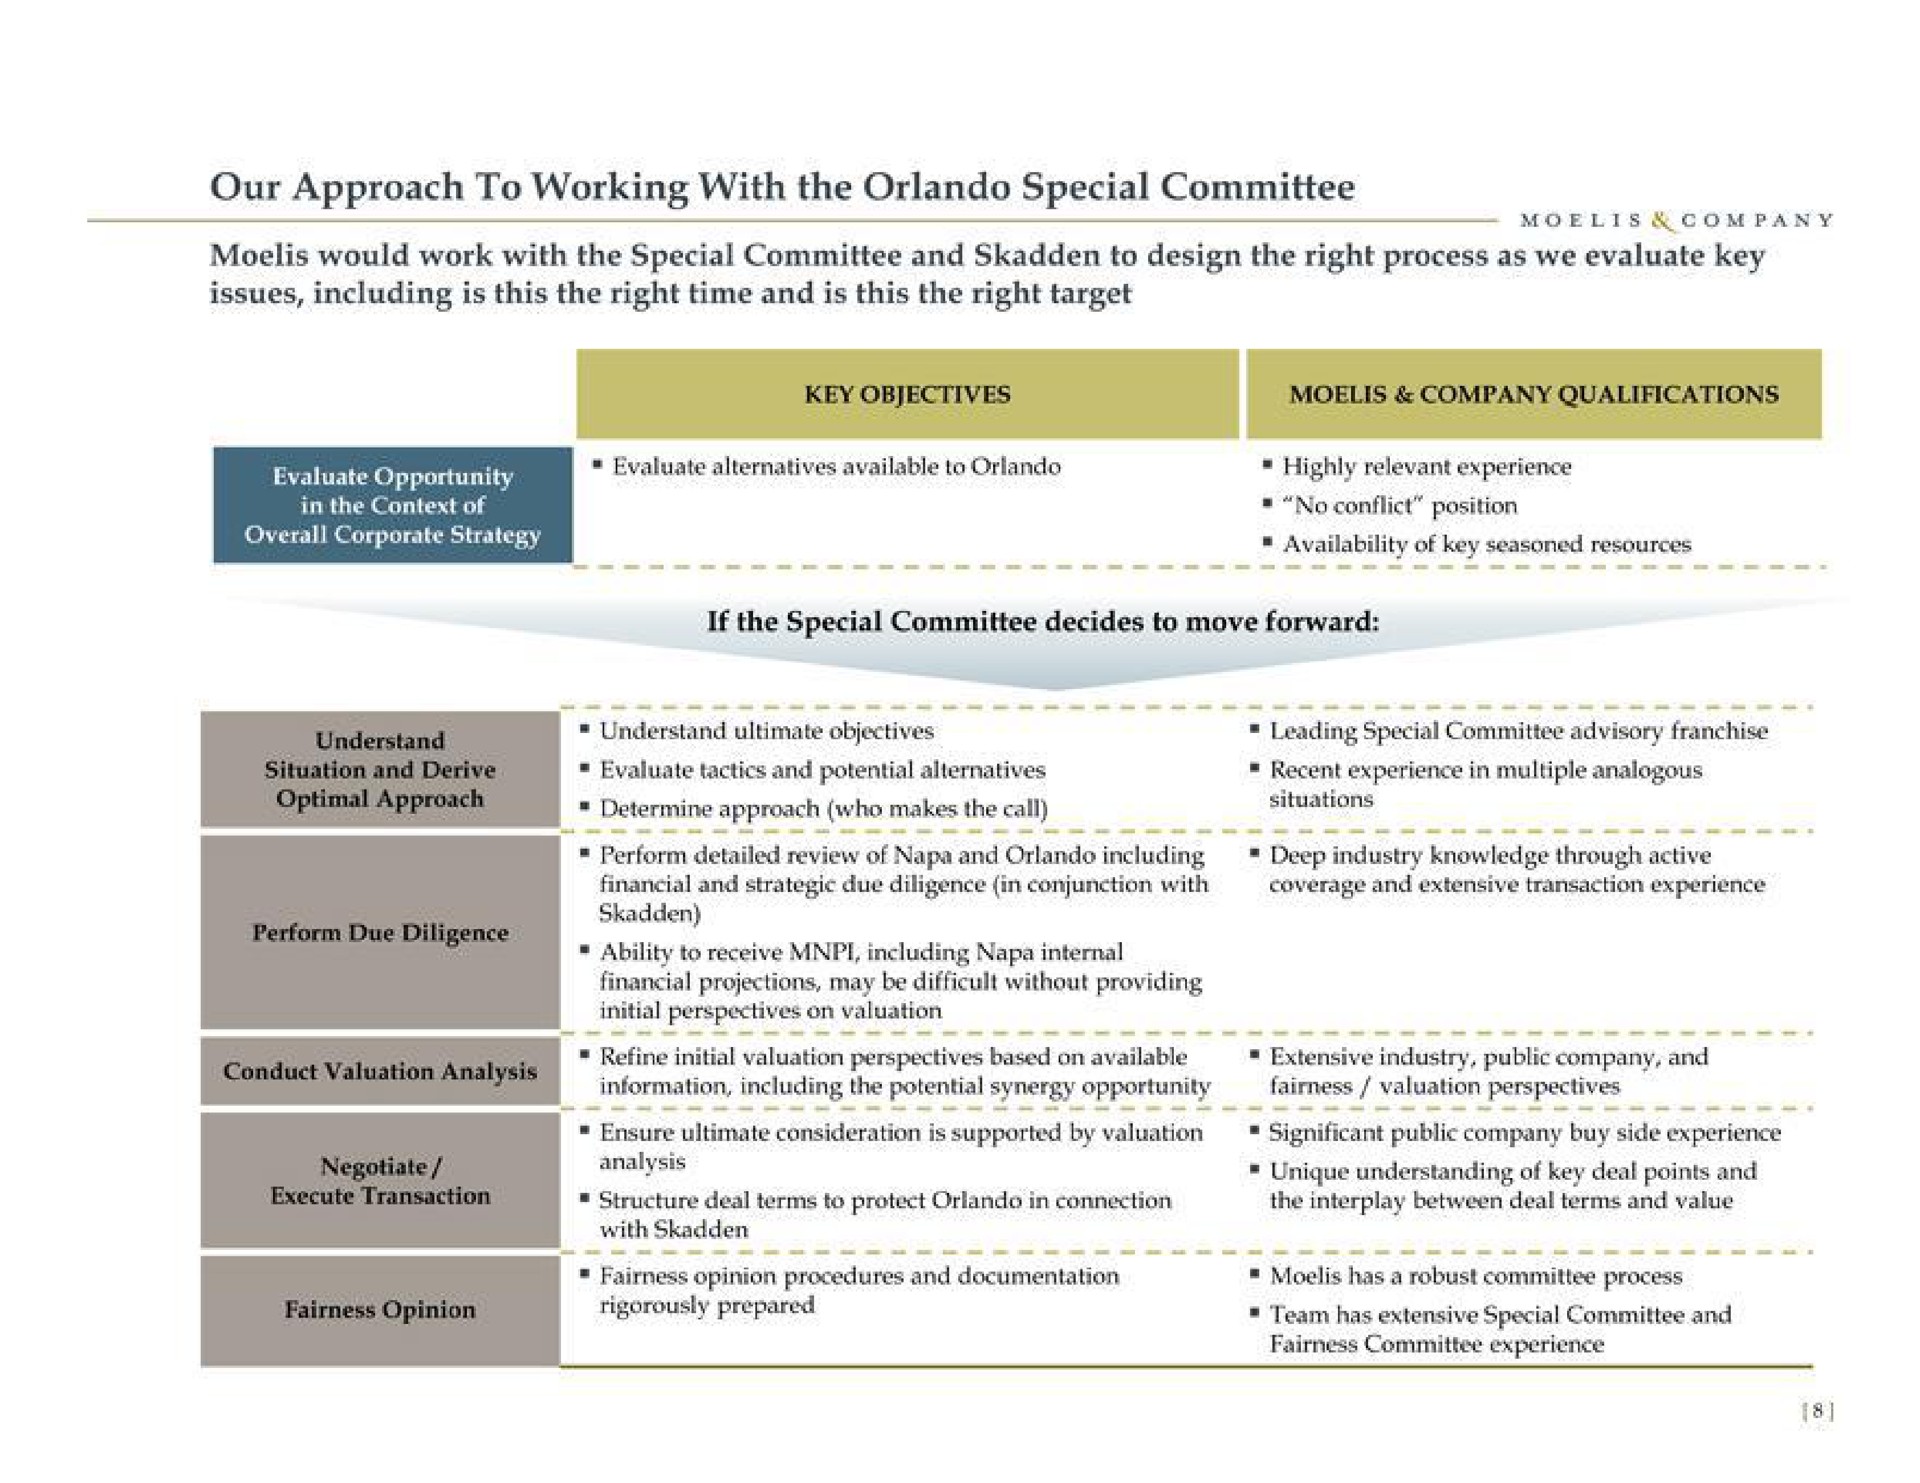 our approach to working with the special committee would work with the special committee and to design the right process as we evaluate key issues including is this the right time and is this the right target | Moelis & Company